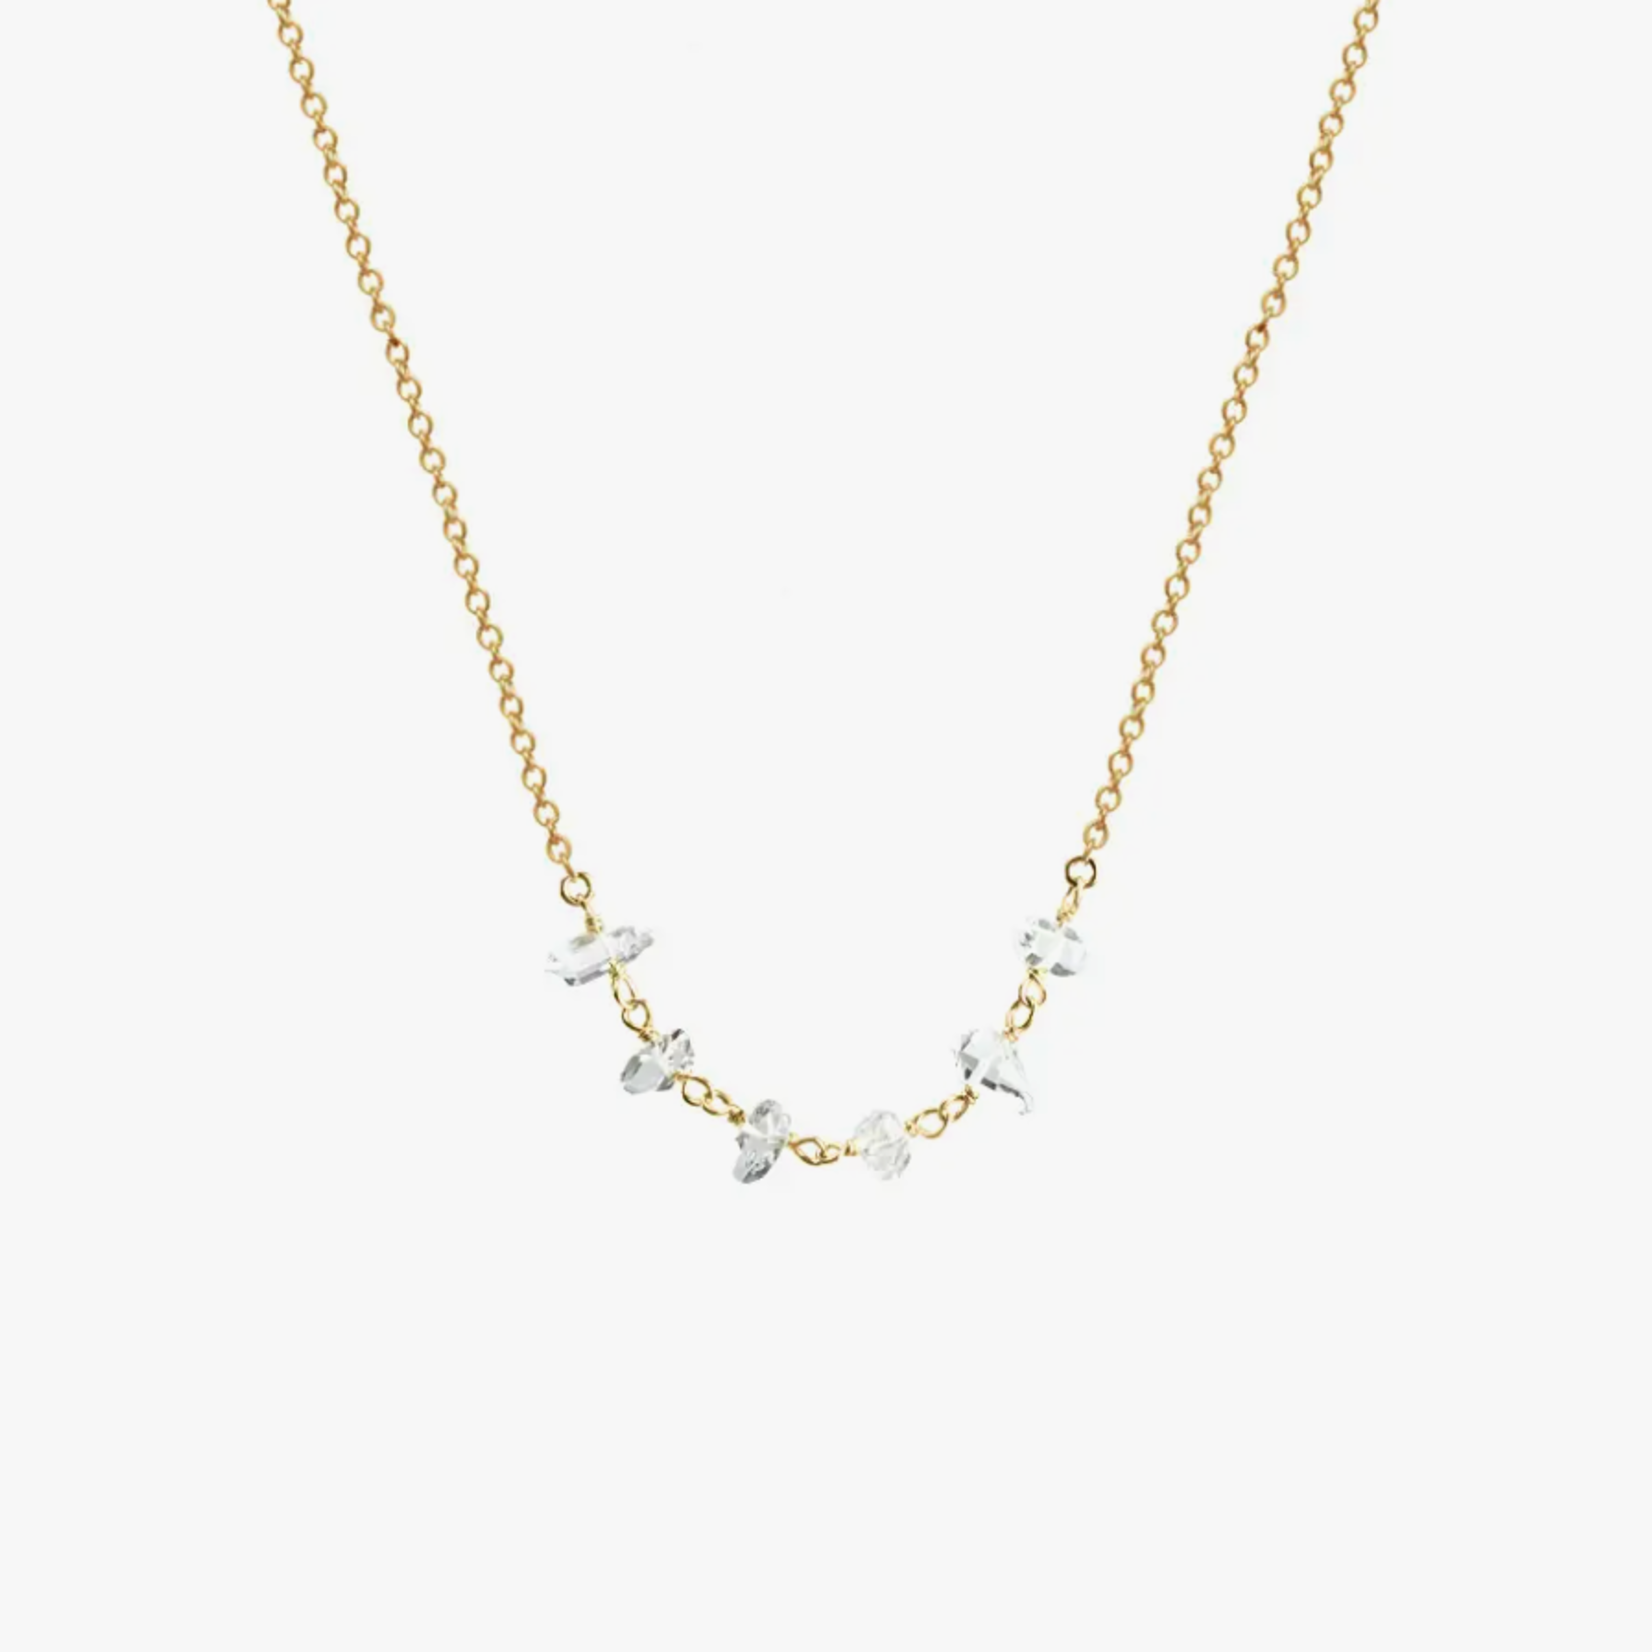 Herkimer on Chain Necklace